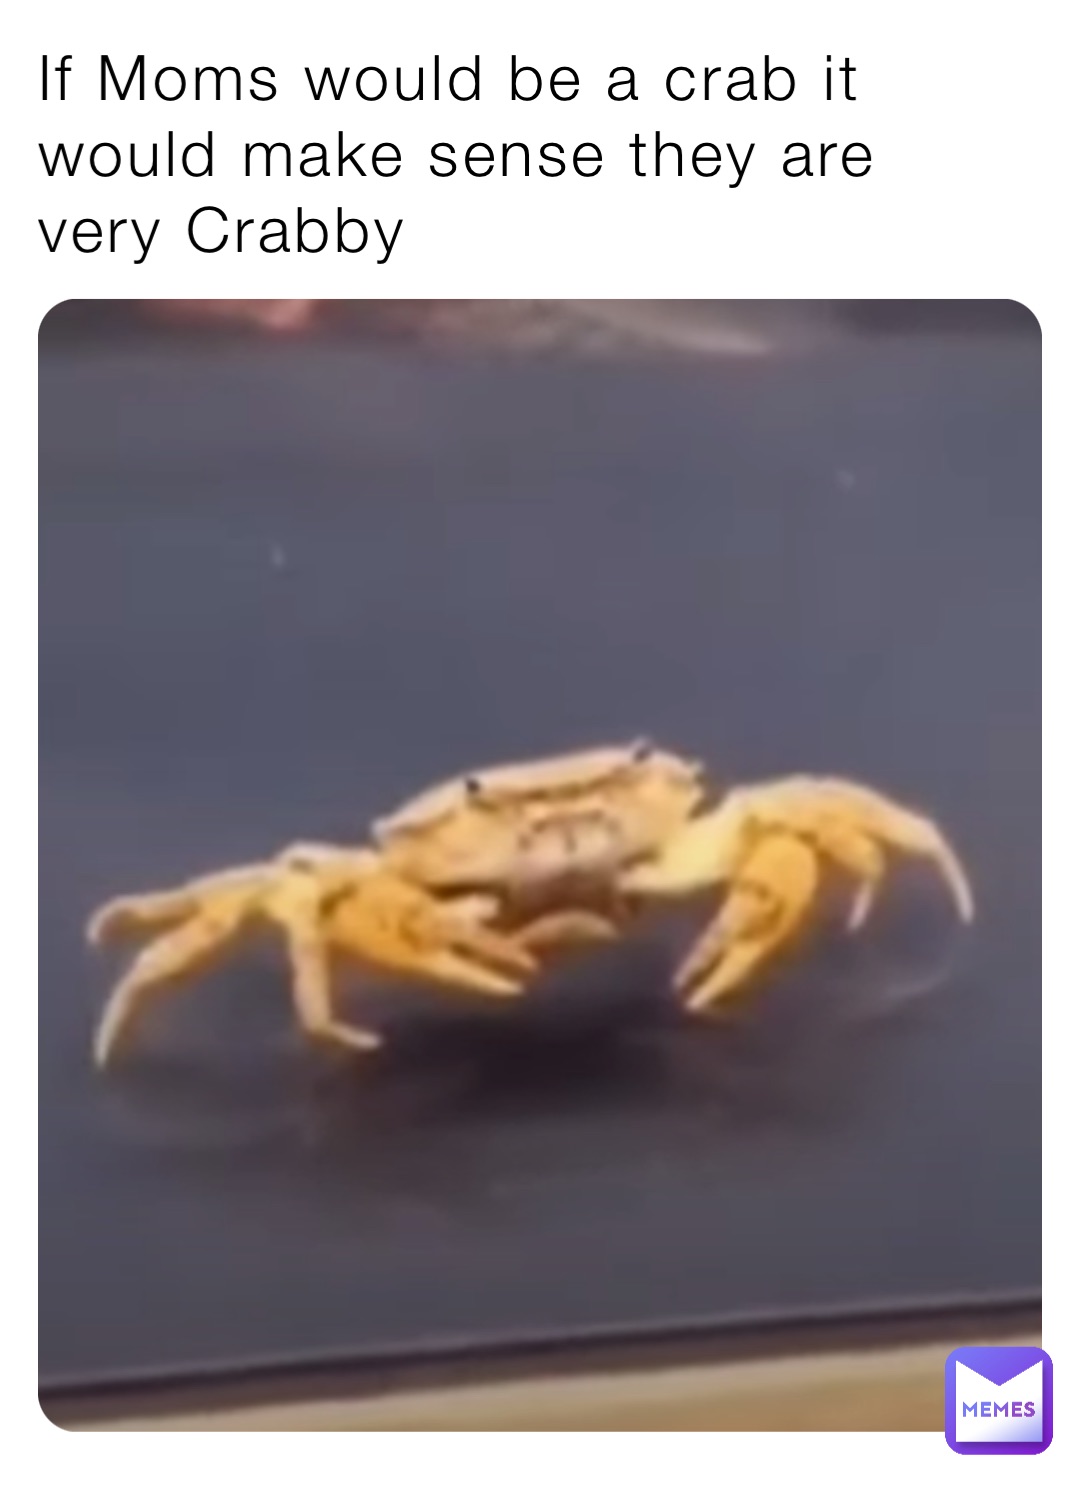 If Moms would be a crab it would make sense they are very Crabby